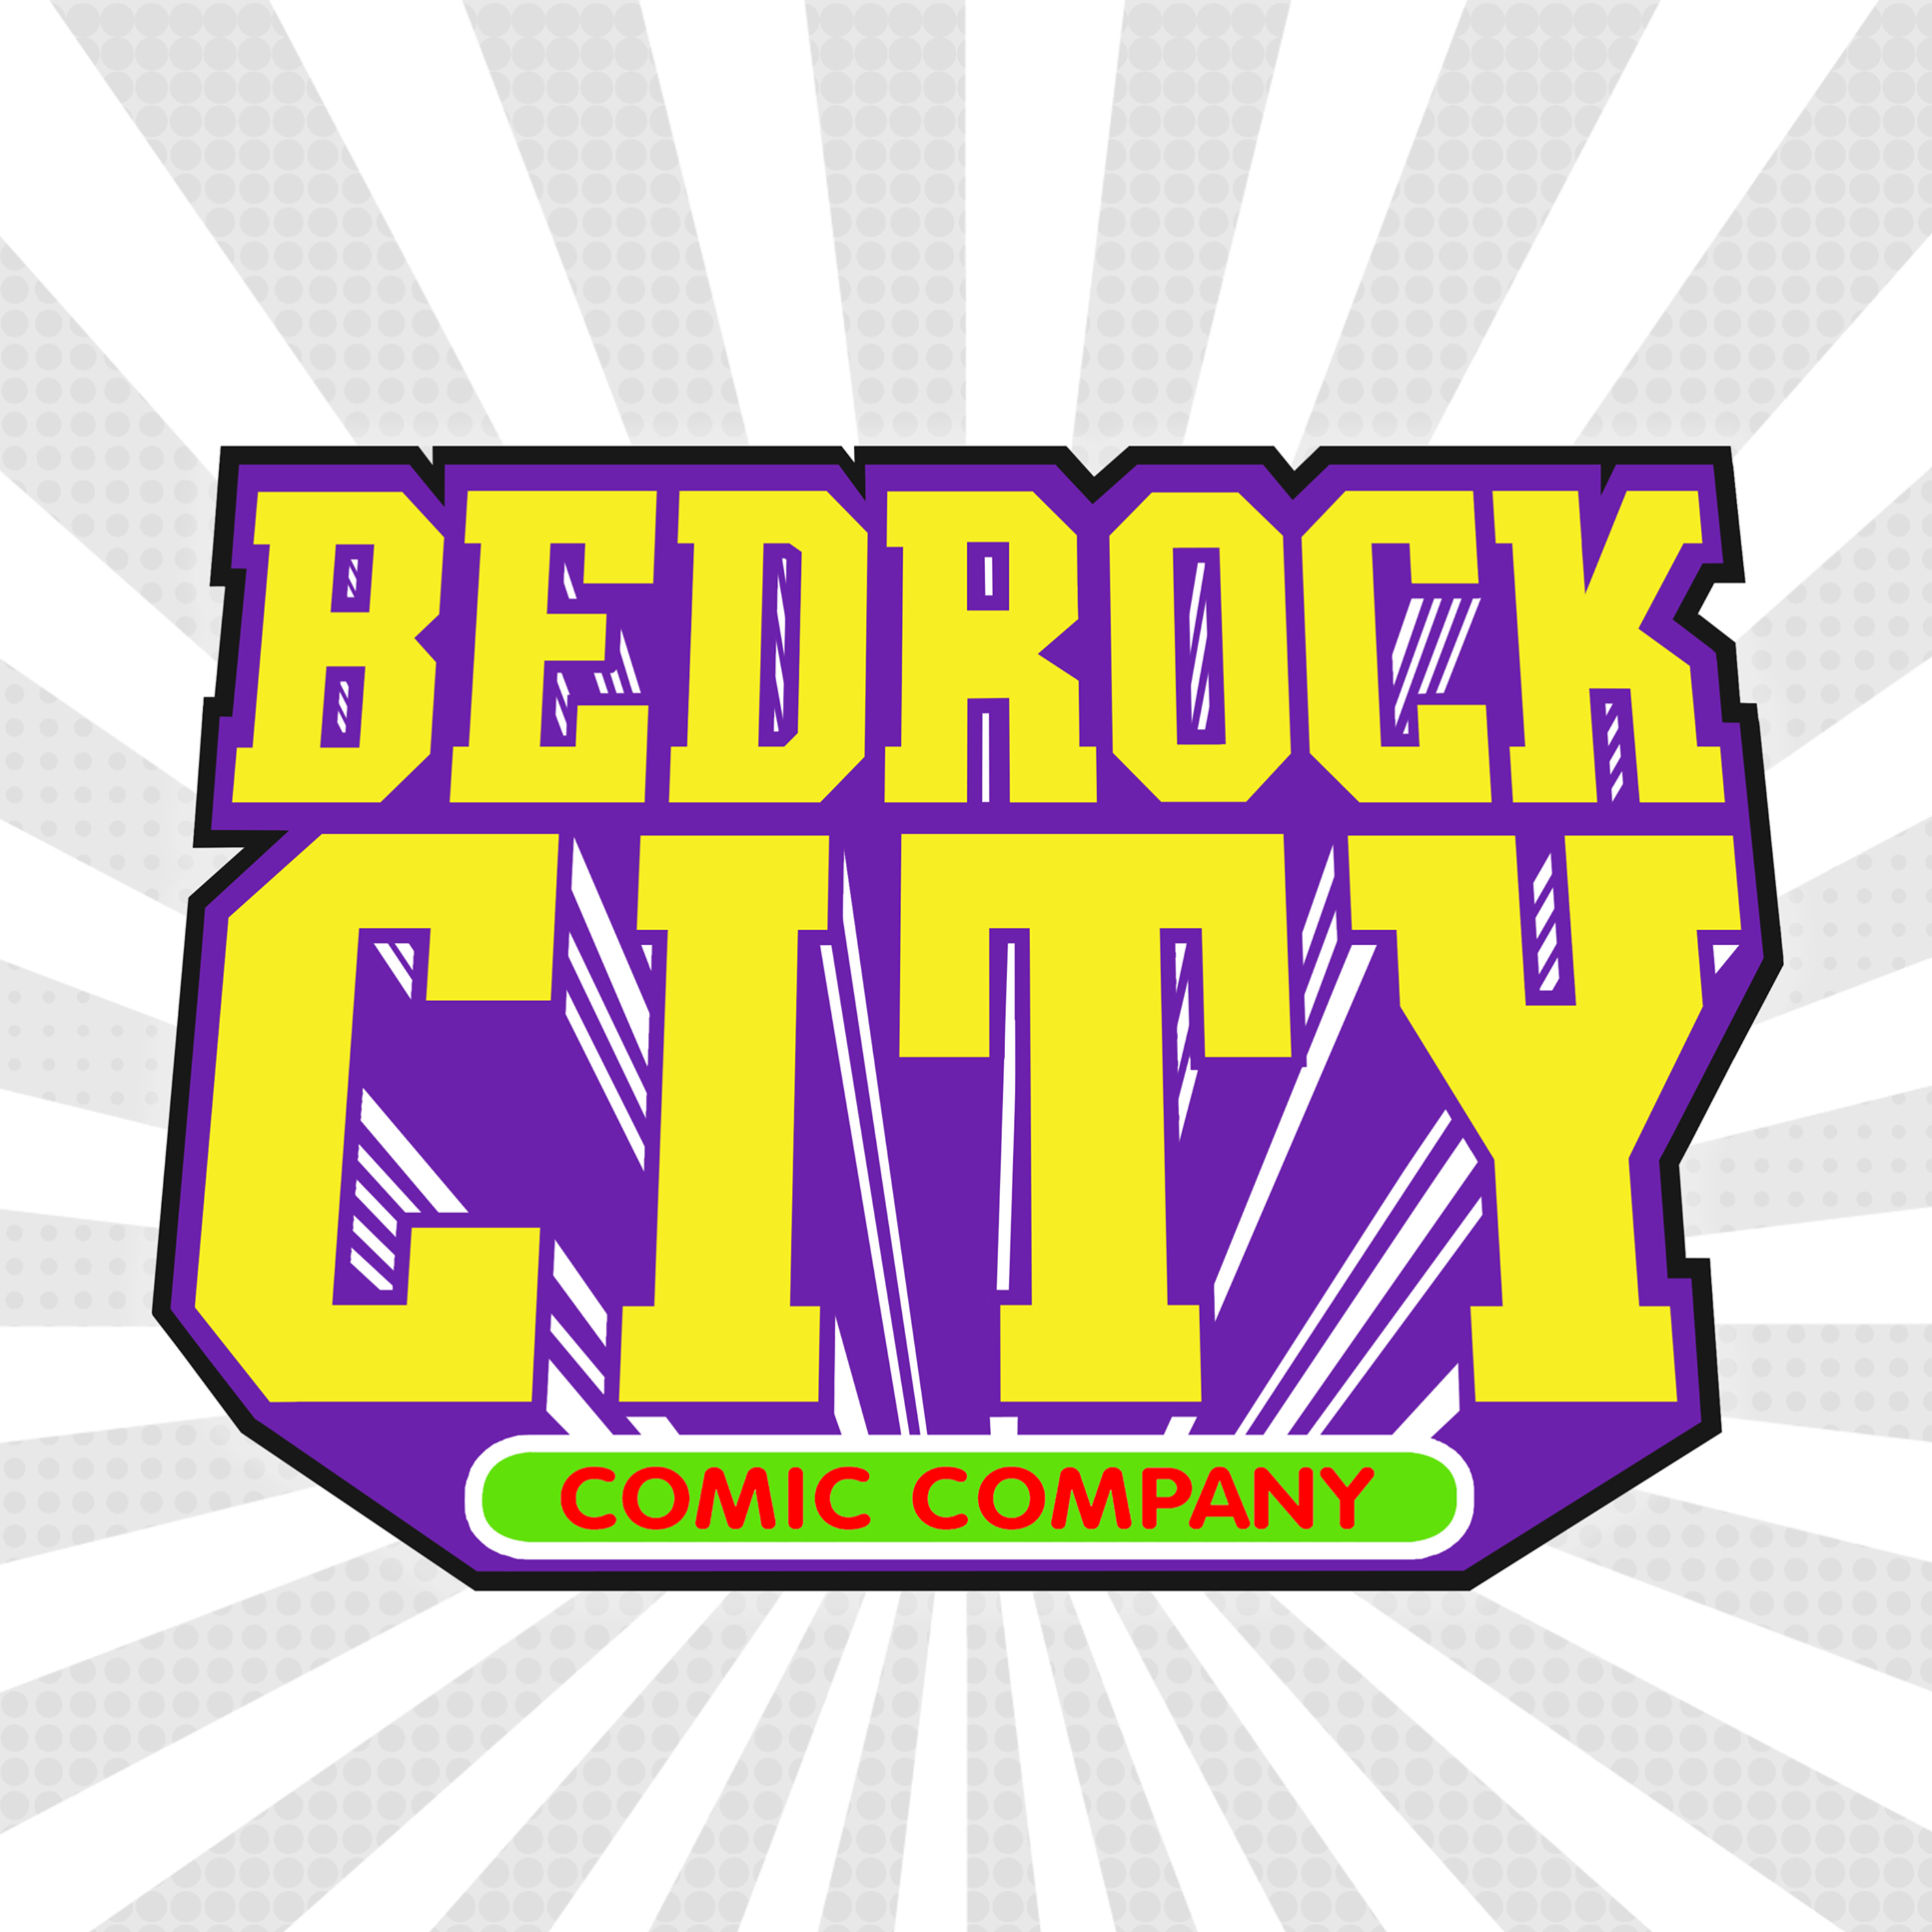 PHOTO: Bedrock City is located on Bay Area Blvd. Graphic courtesy of Bedrock City Comic Company.